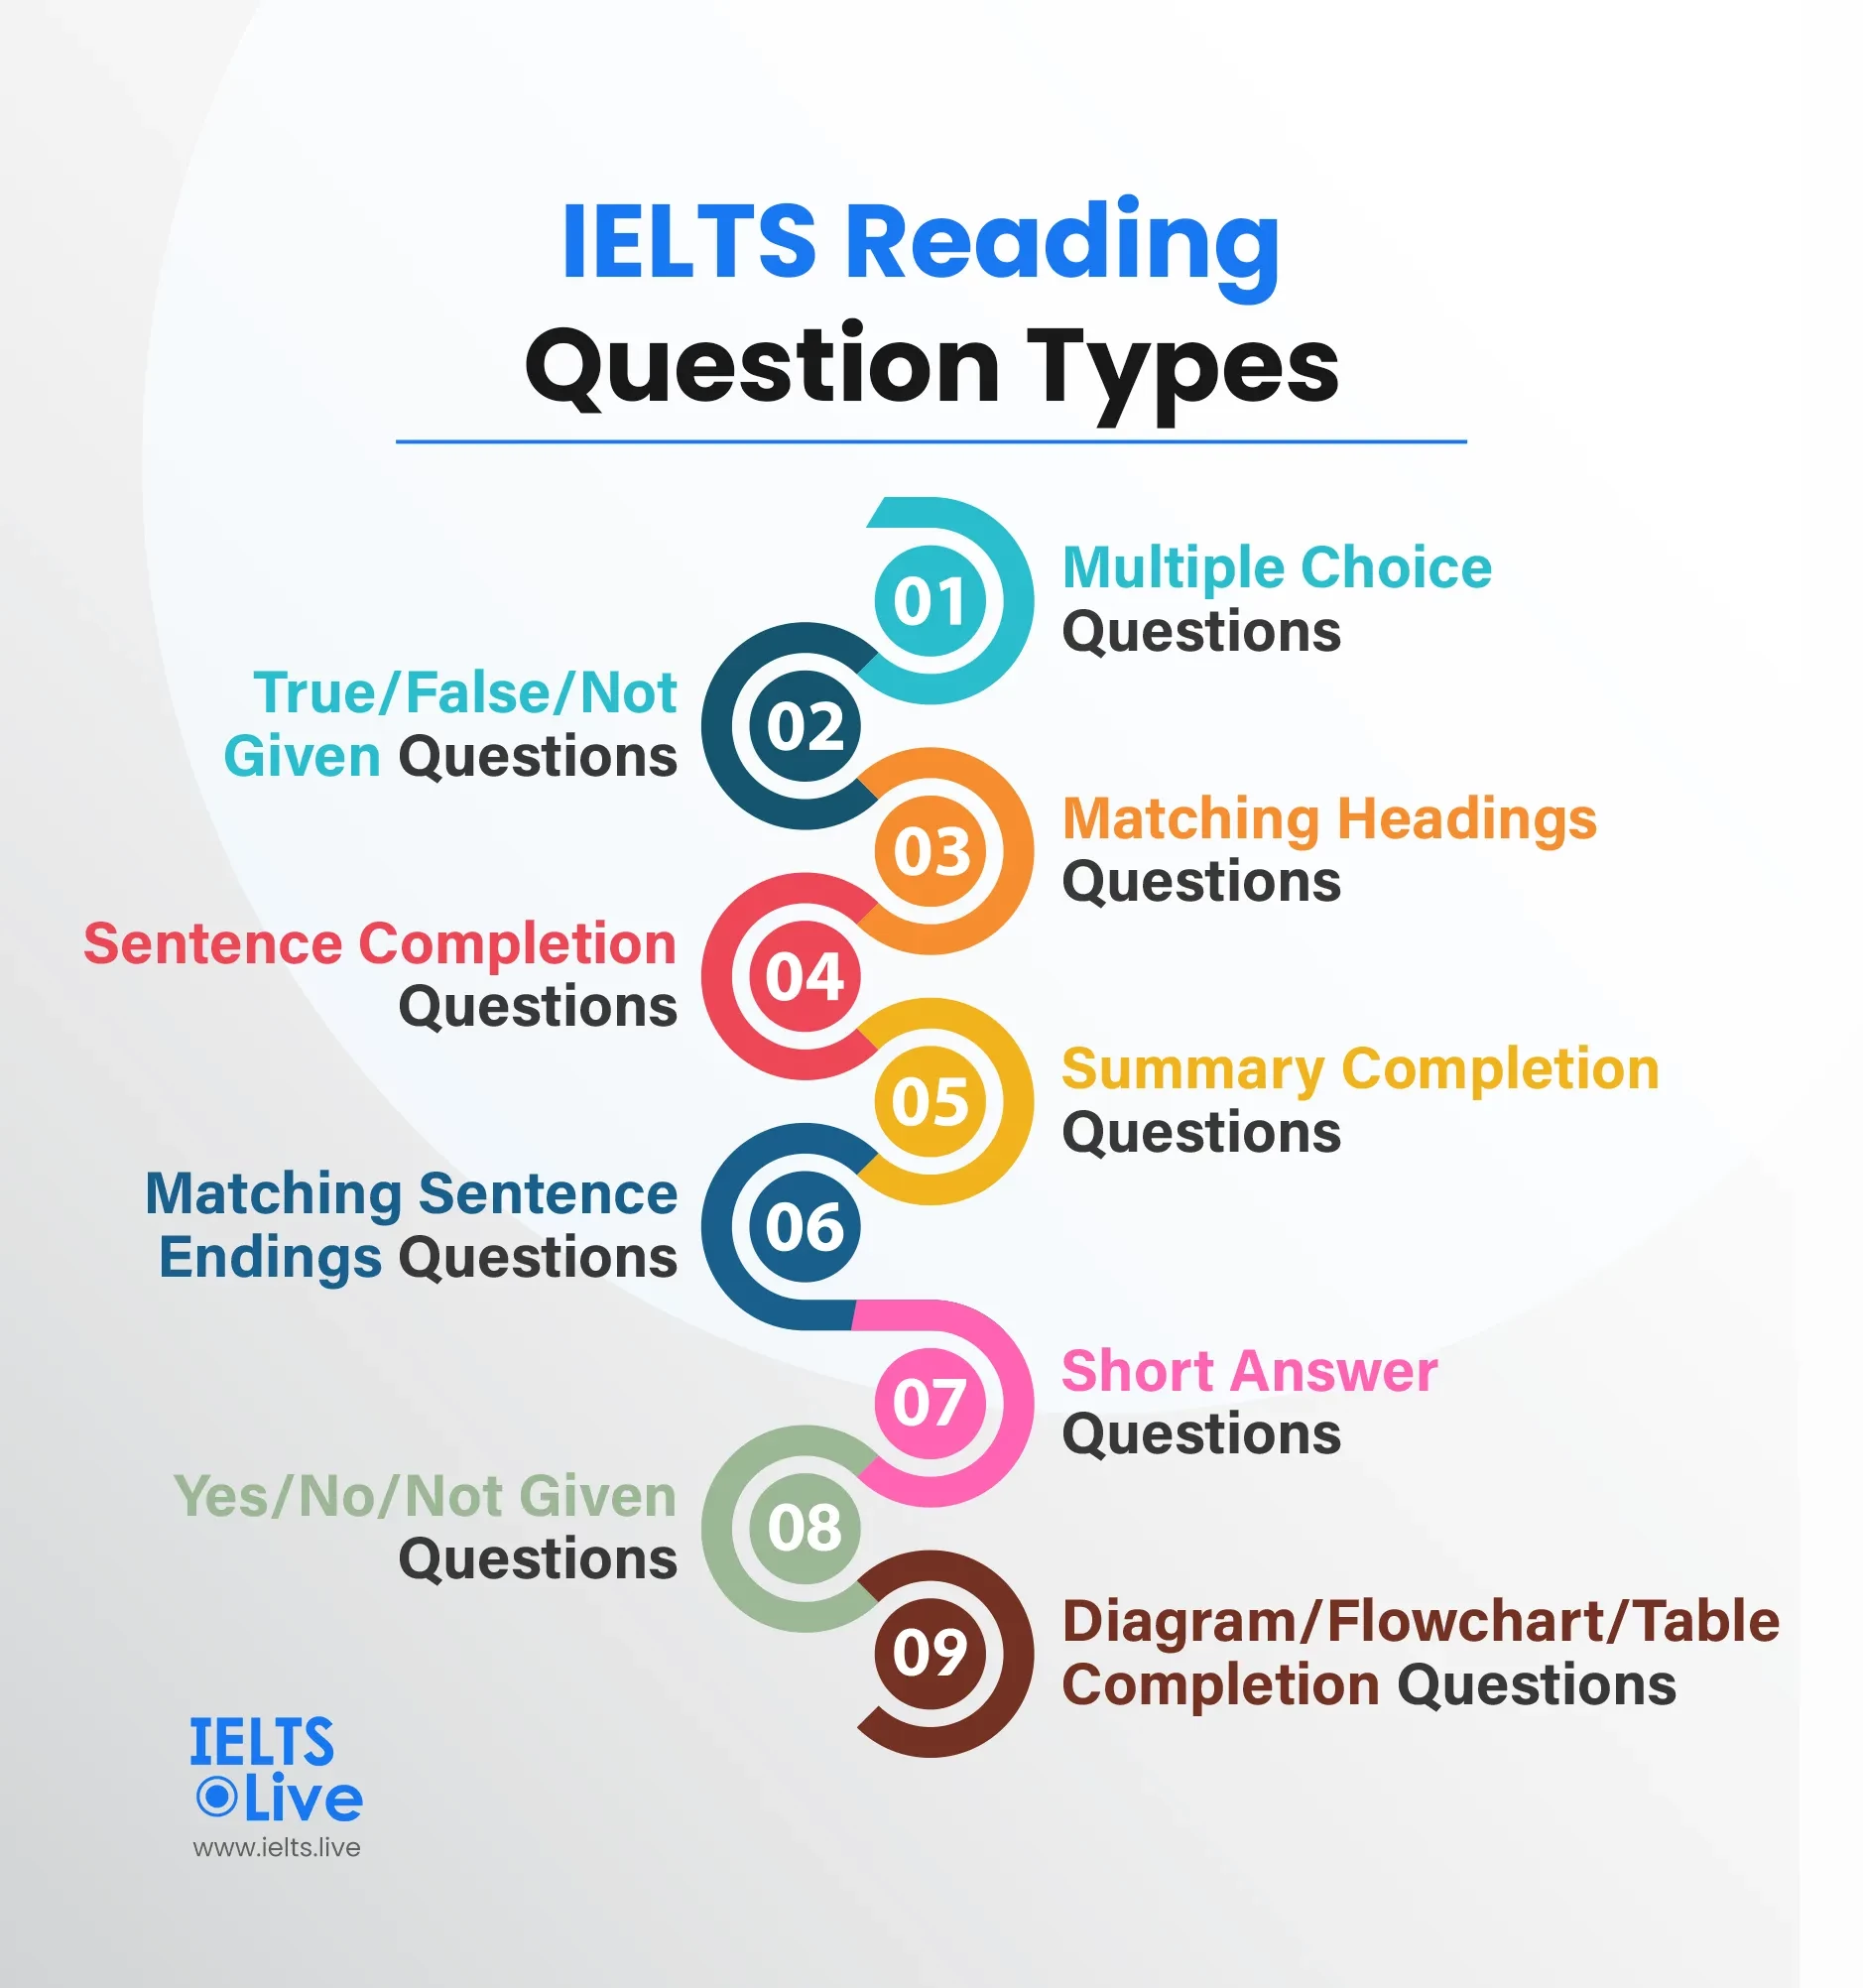 Difference Types of IELTS Reading Question